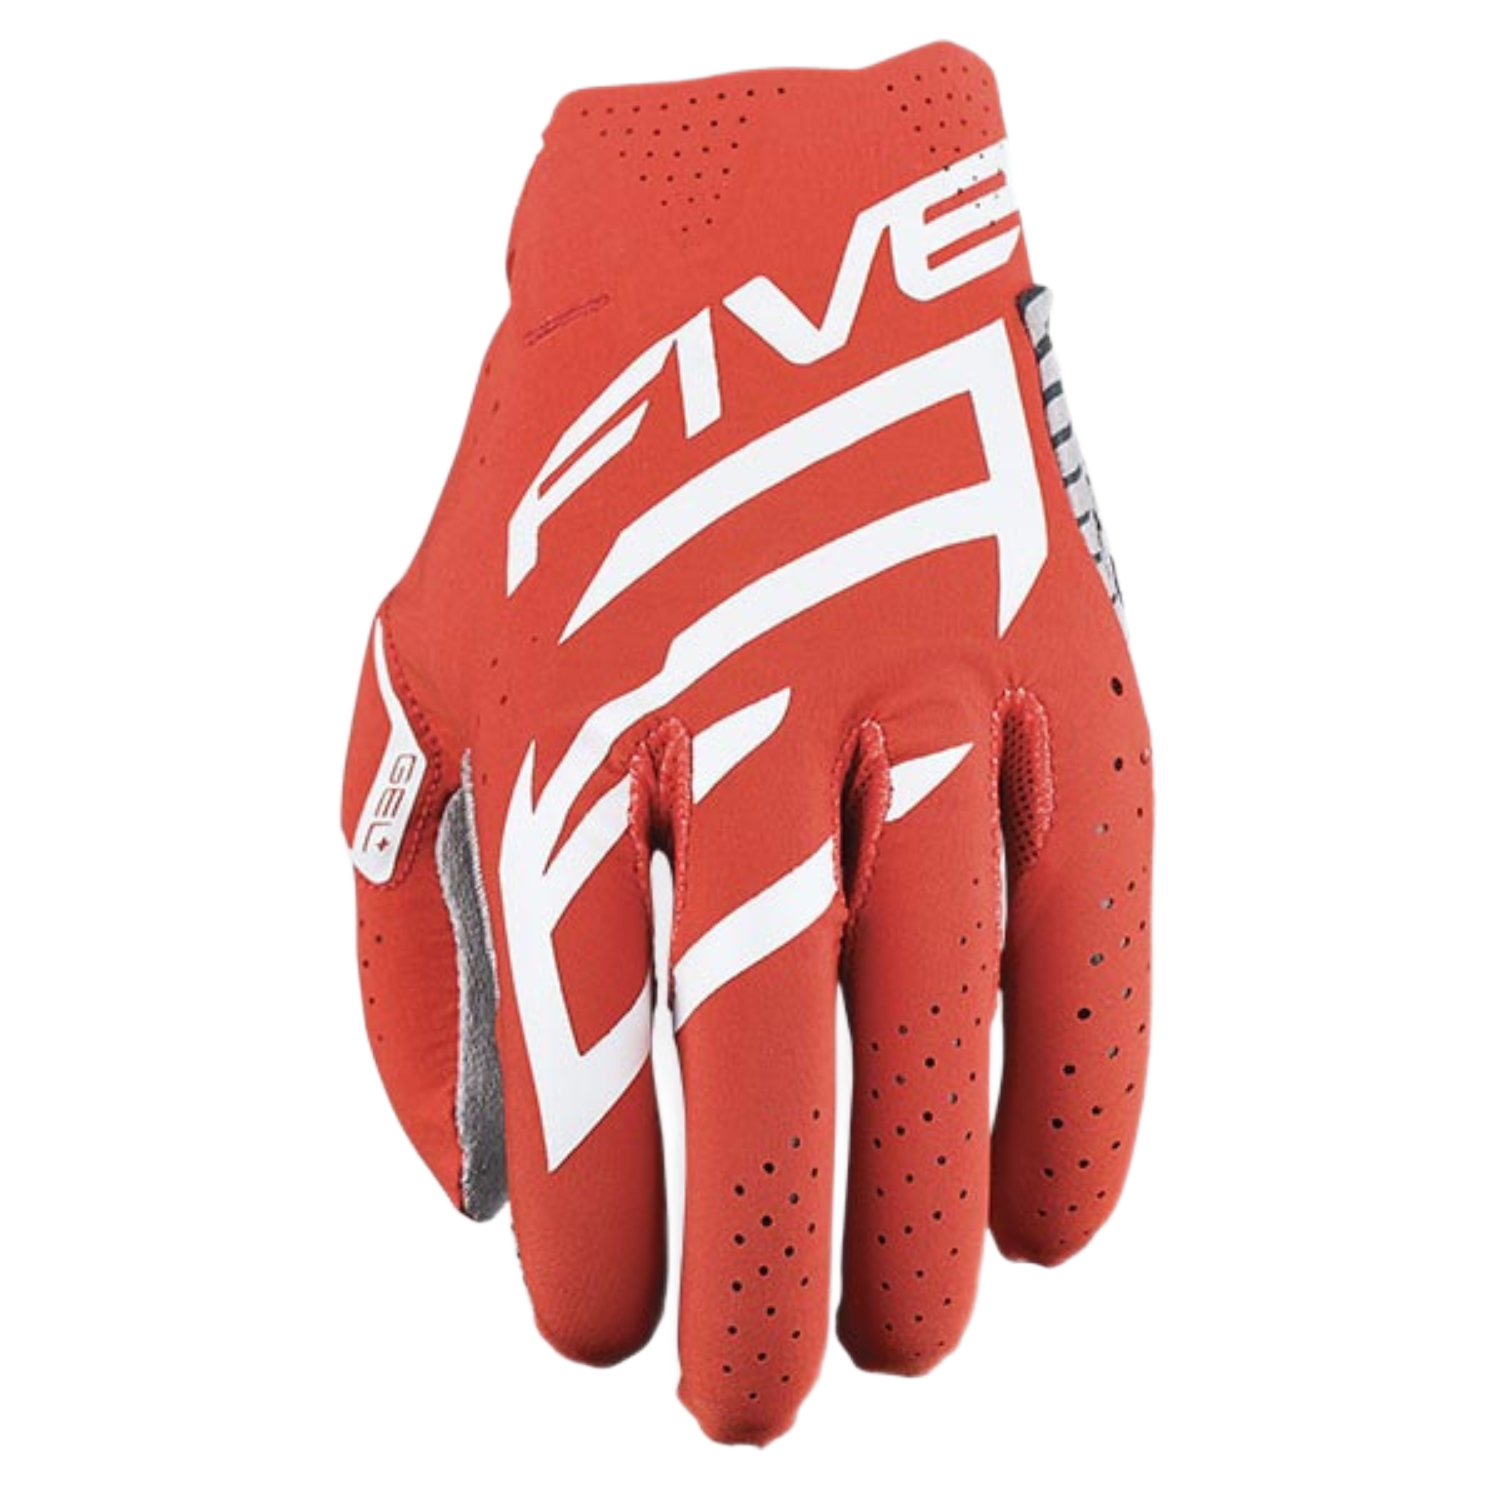 Five MXF Race Gloves Red Size M